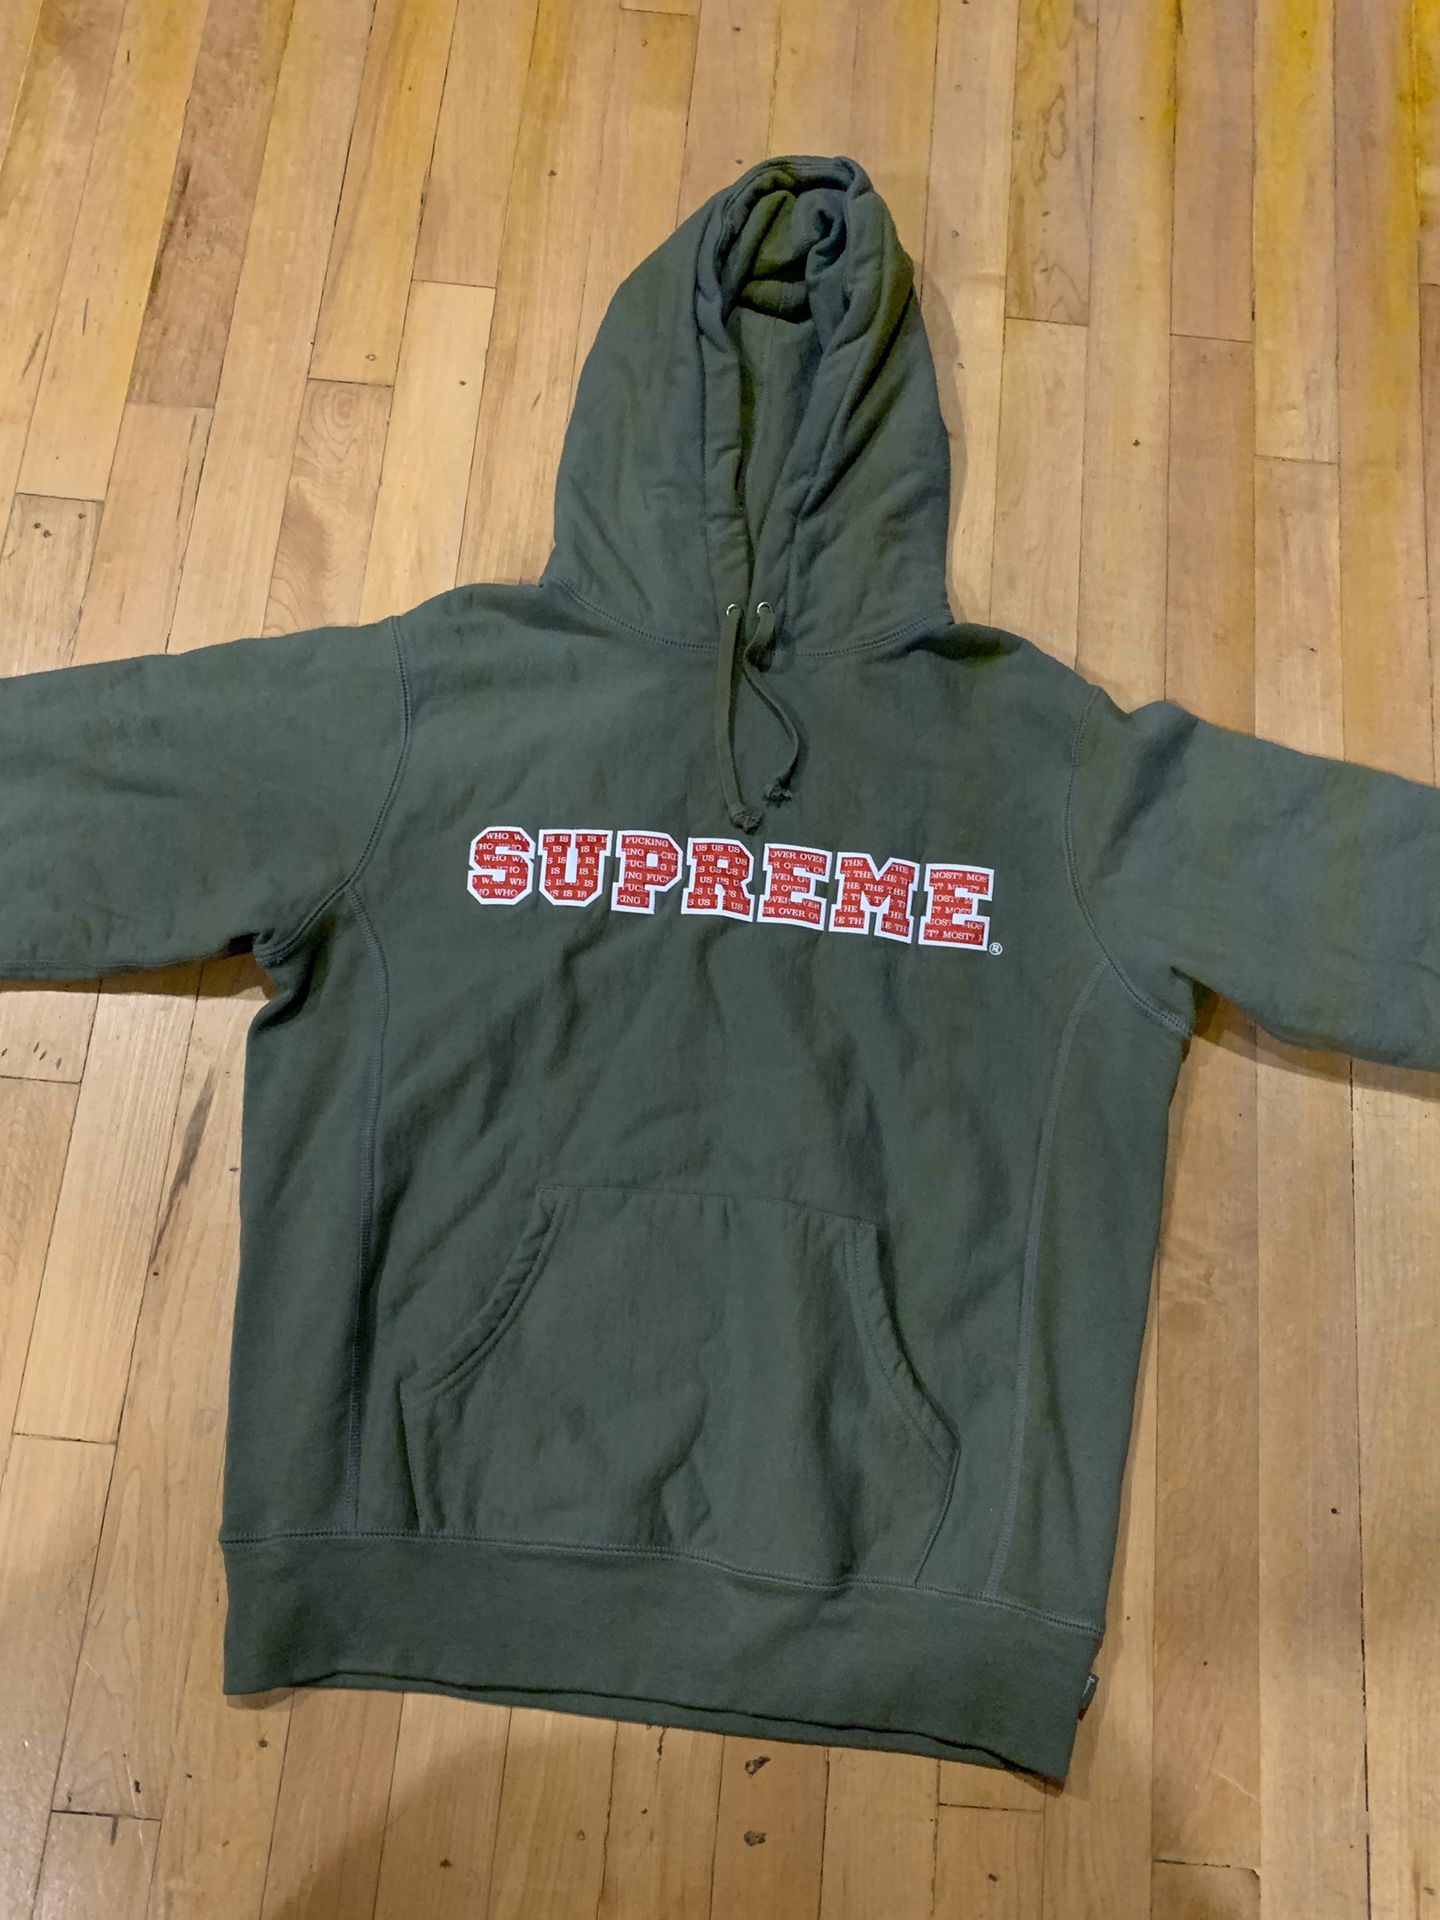 Supreme Hoodie Green Size Medium Authentic “Who is F’ing you the most?”